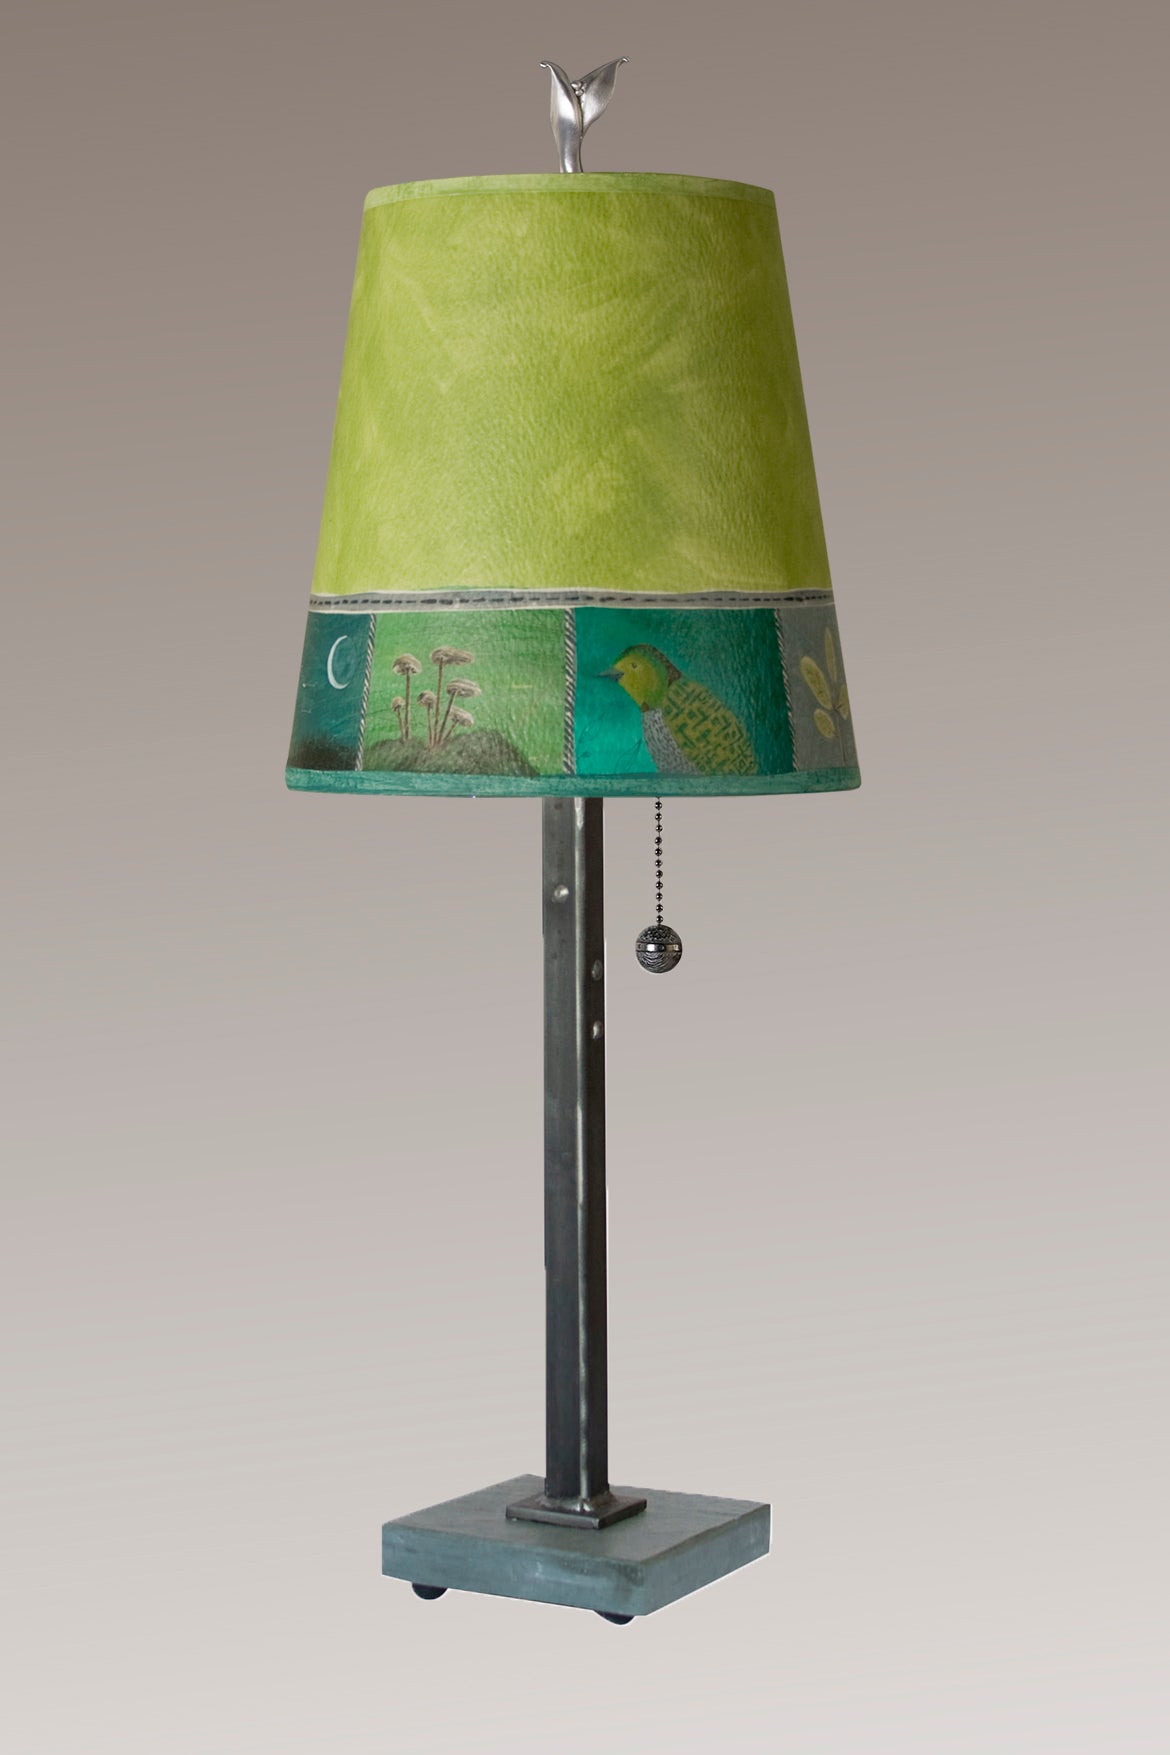 Janna Ugone &amp; Co Table Lamps Steel Table Lamp with Small Drum Shade in Woodland Trails in Leaf